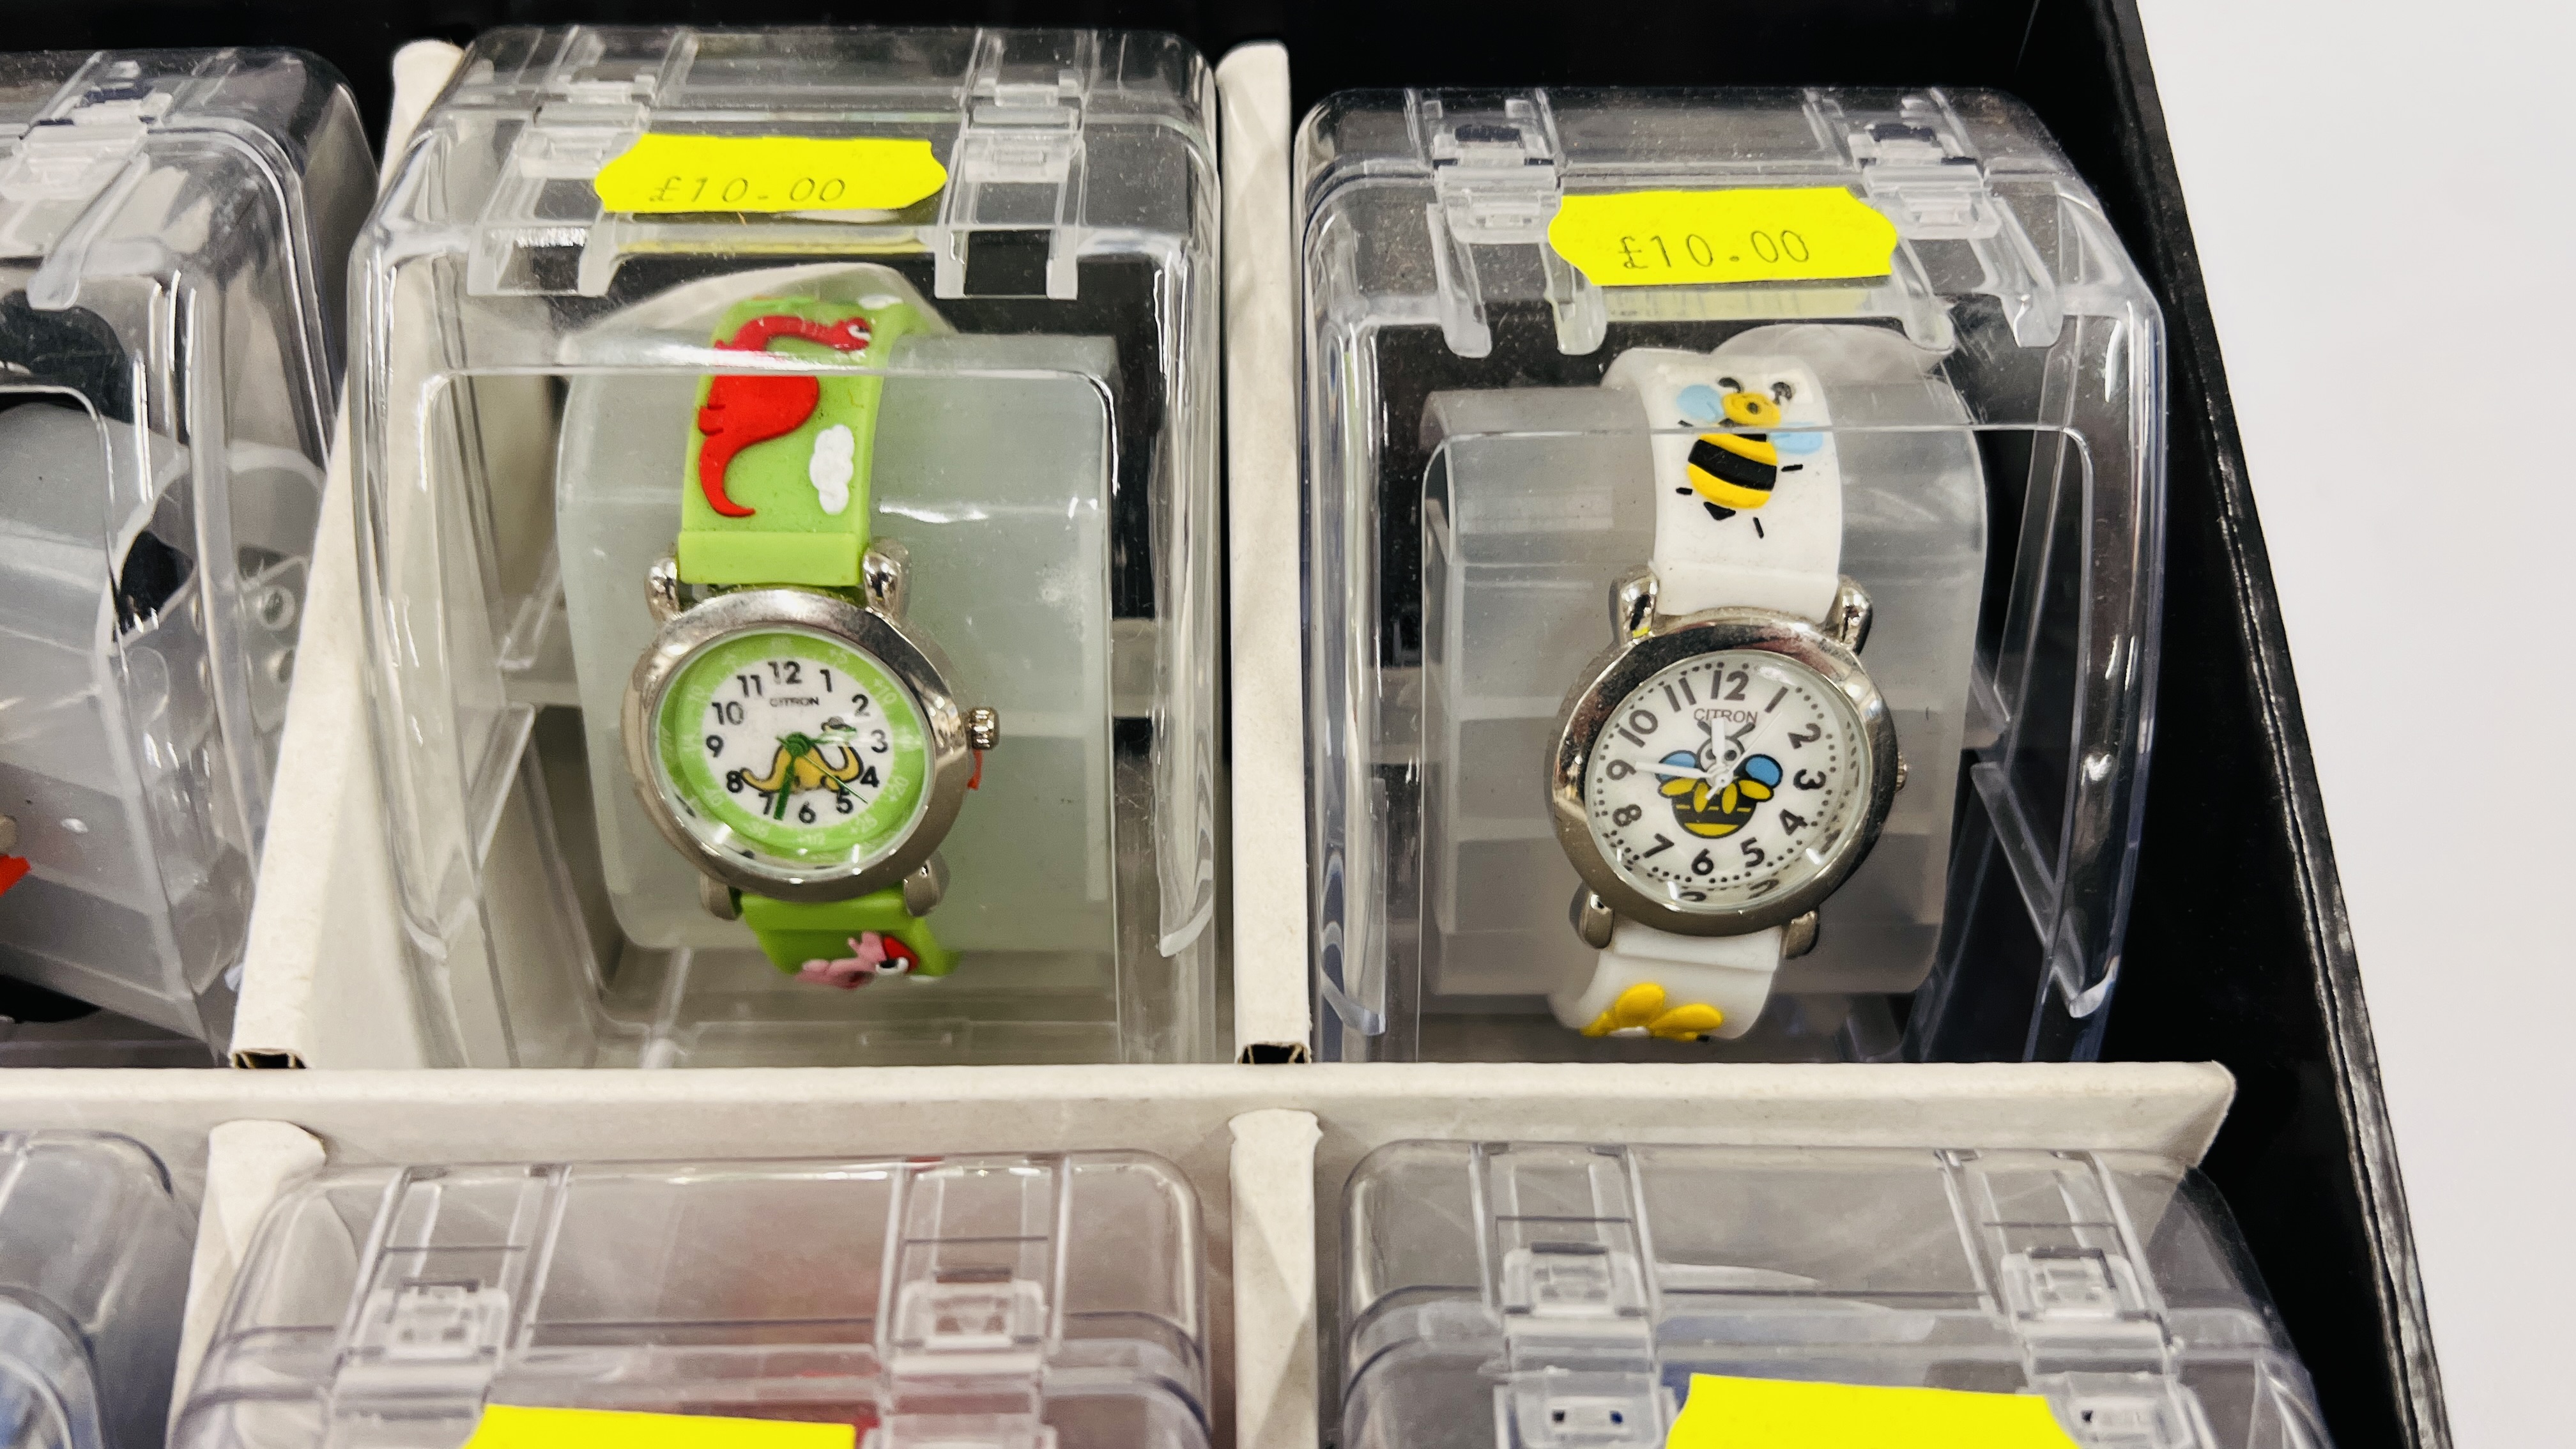 BANKRUPTCY STOCK - 12 X BOXED CITRON CHILDREN'S WRIST WATCHES VARIOUS DESIGNS. - Image 7 of 7